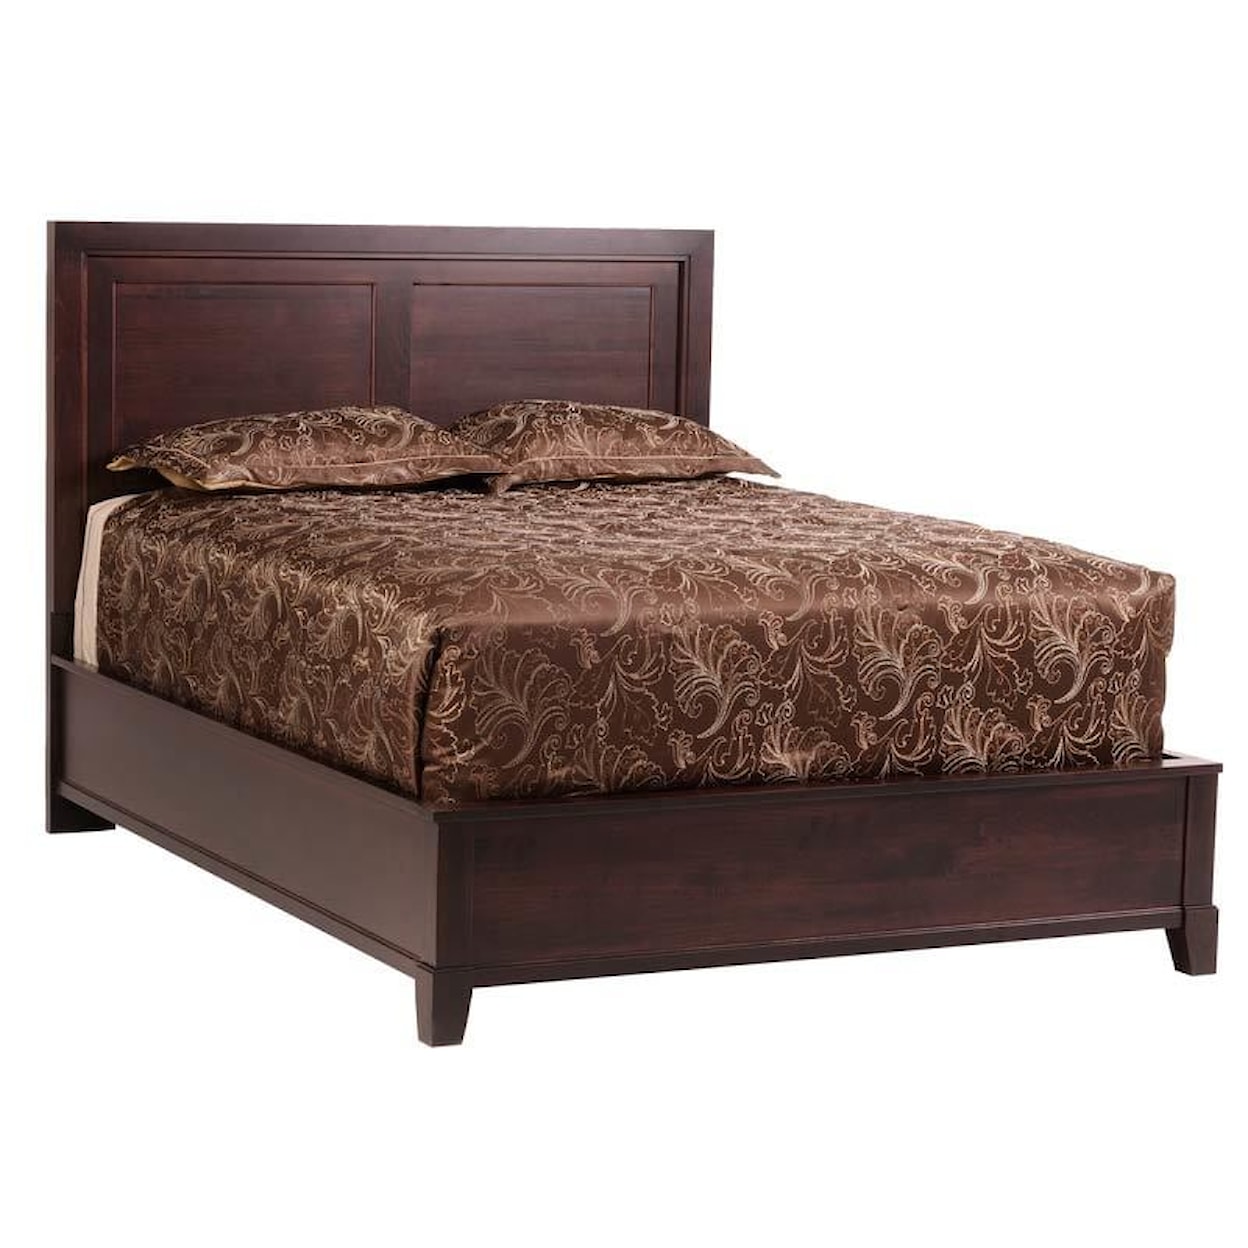 Millcraft Greenwich California King Panel Bed